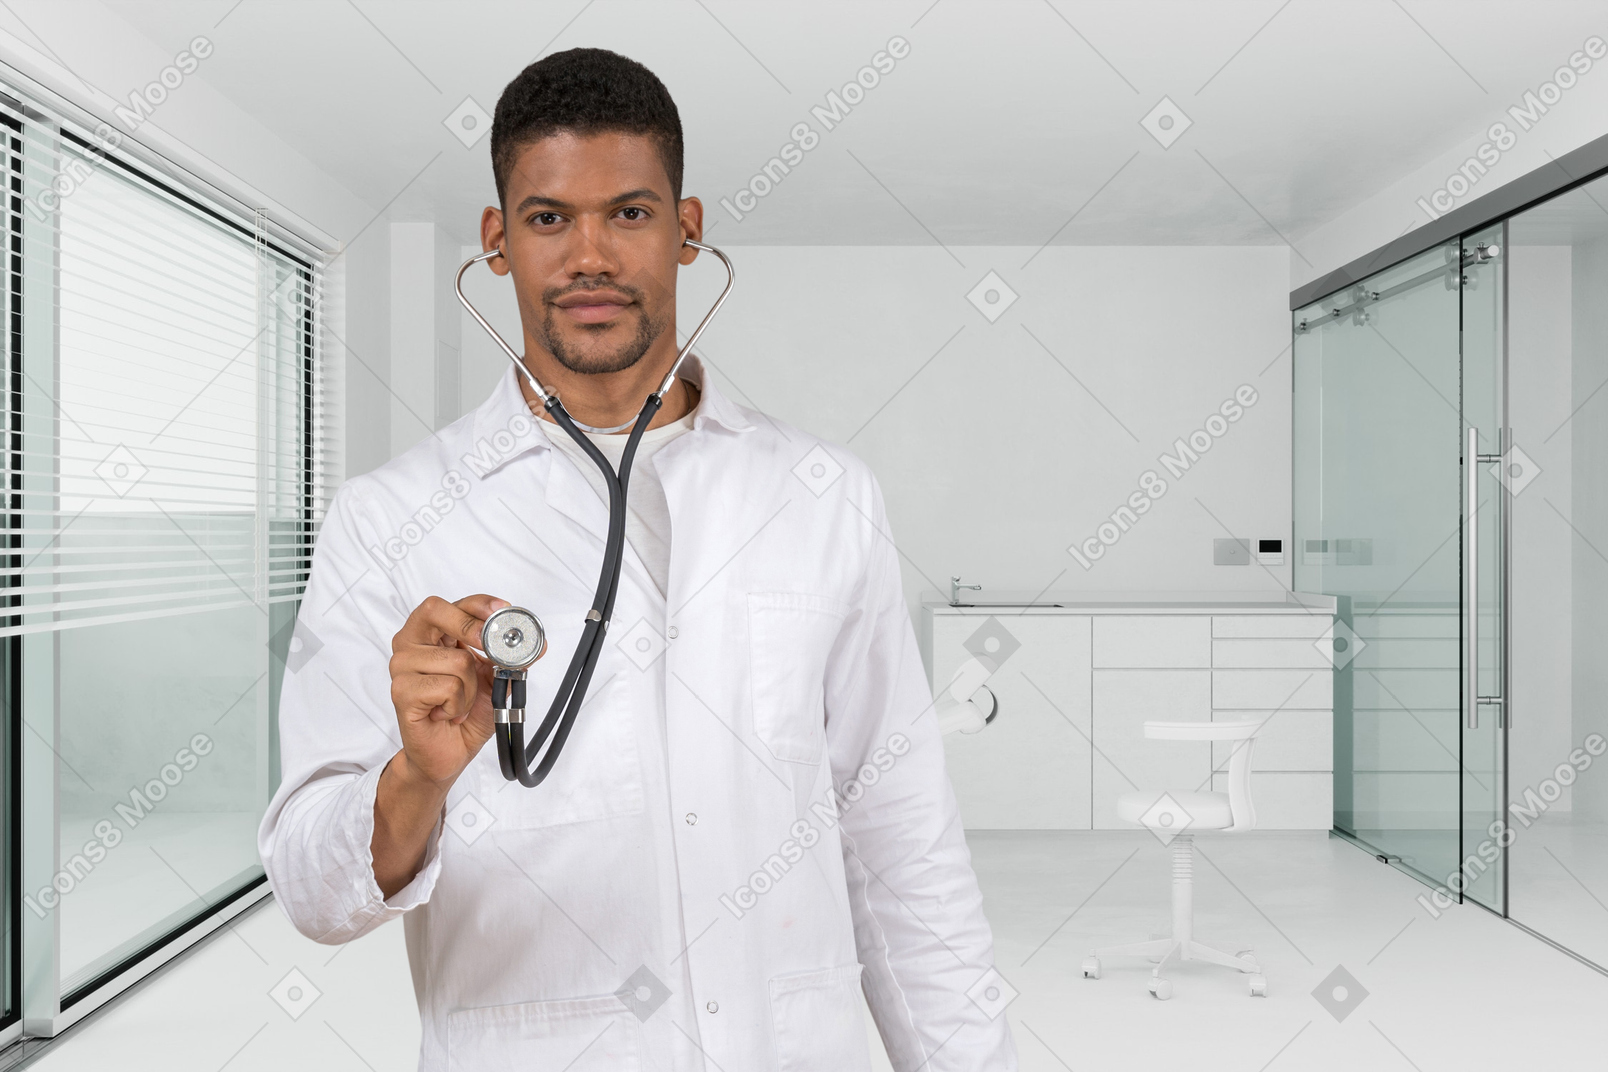 Portrait of a male doctor in a hospital room